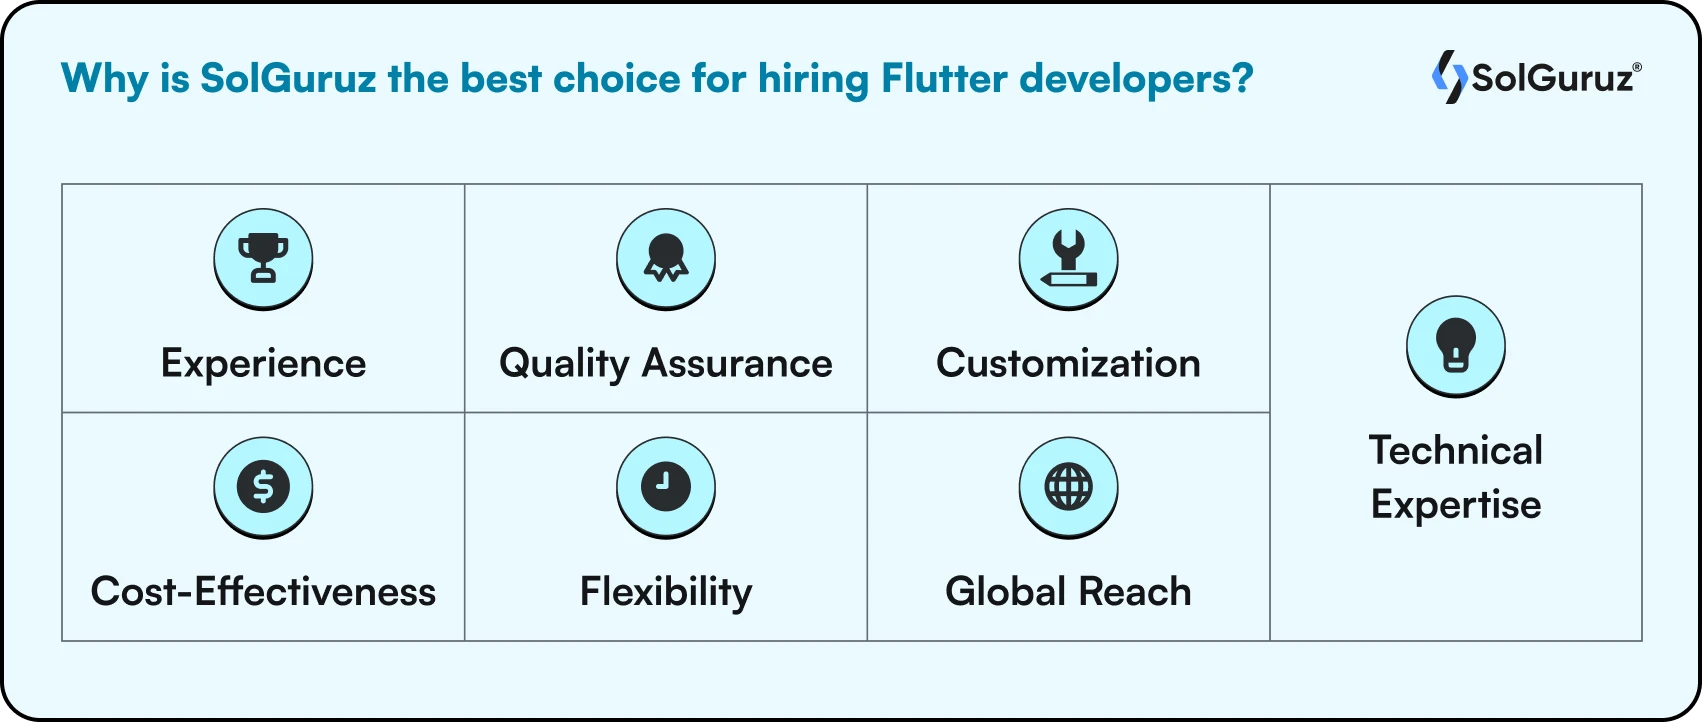 Why is SolGuruz the best choice for hiring Flutter developers